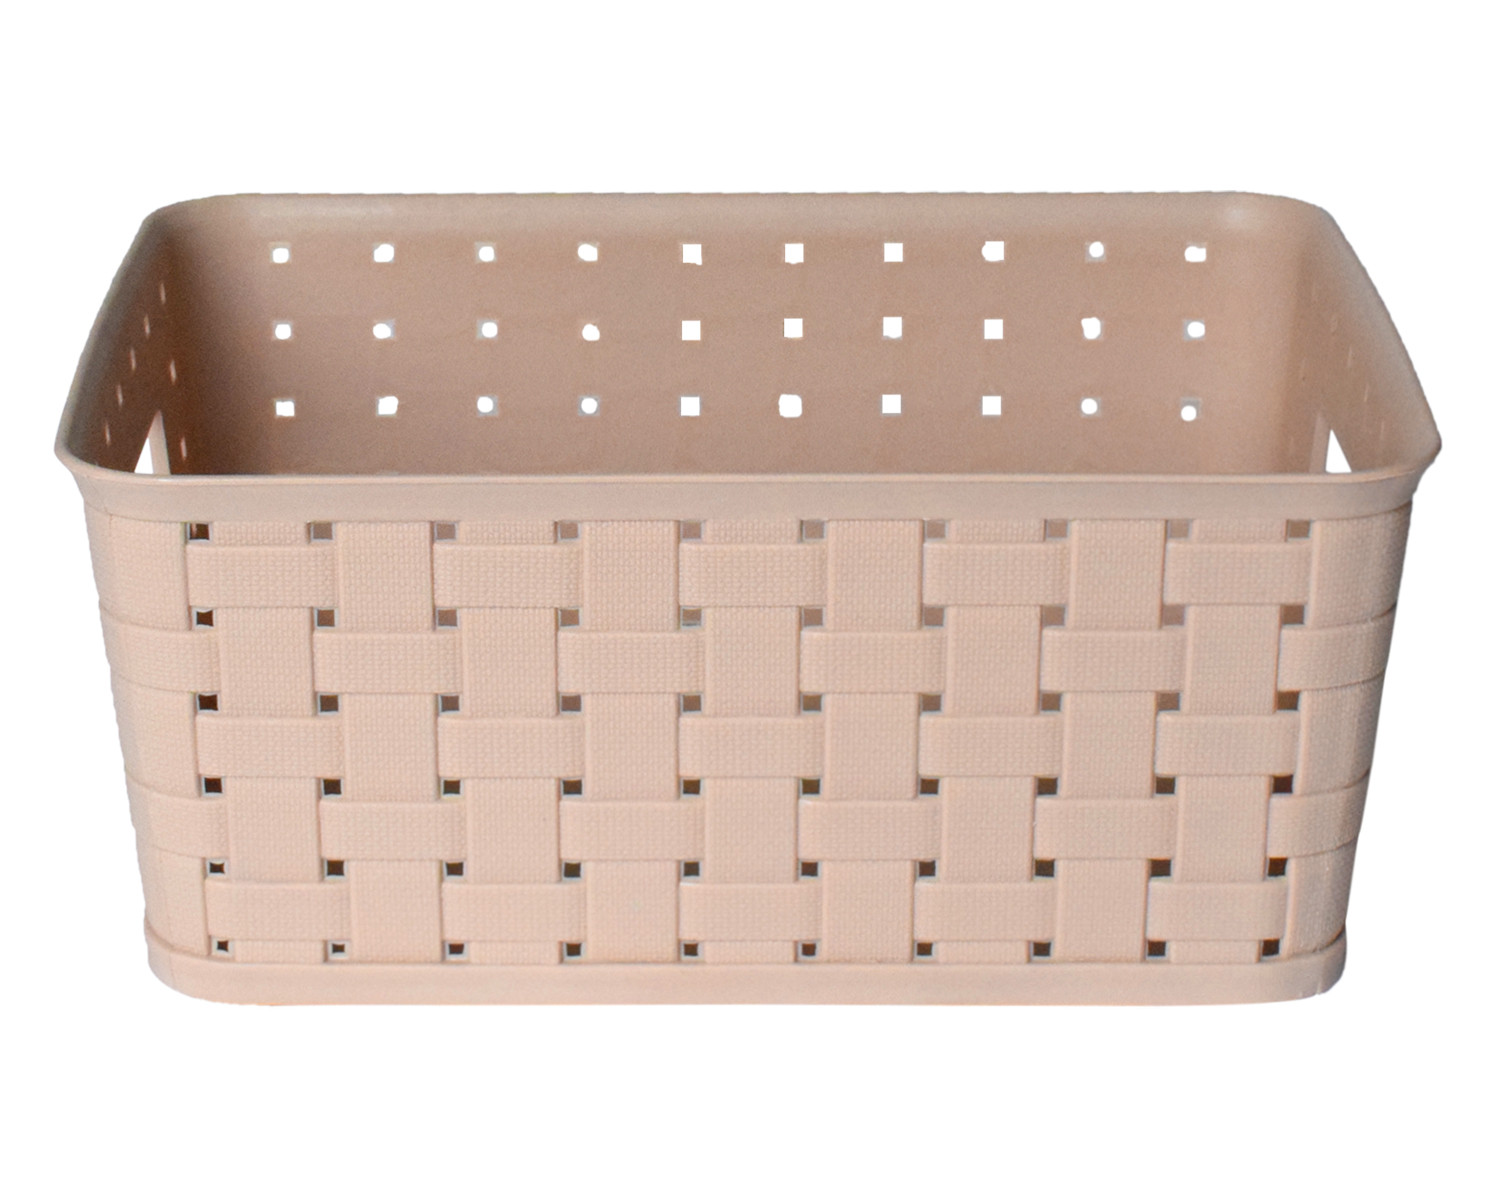 Kuber Industries BPA Free Attractive Design Multipurpose Large Trendy Storage Basket With Lid|Material-Plastic|Color-Light Brown